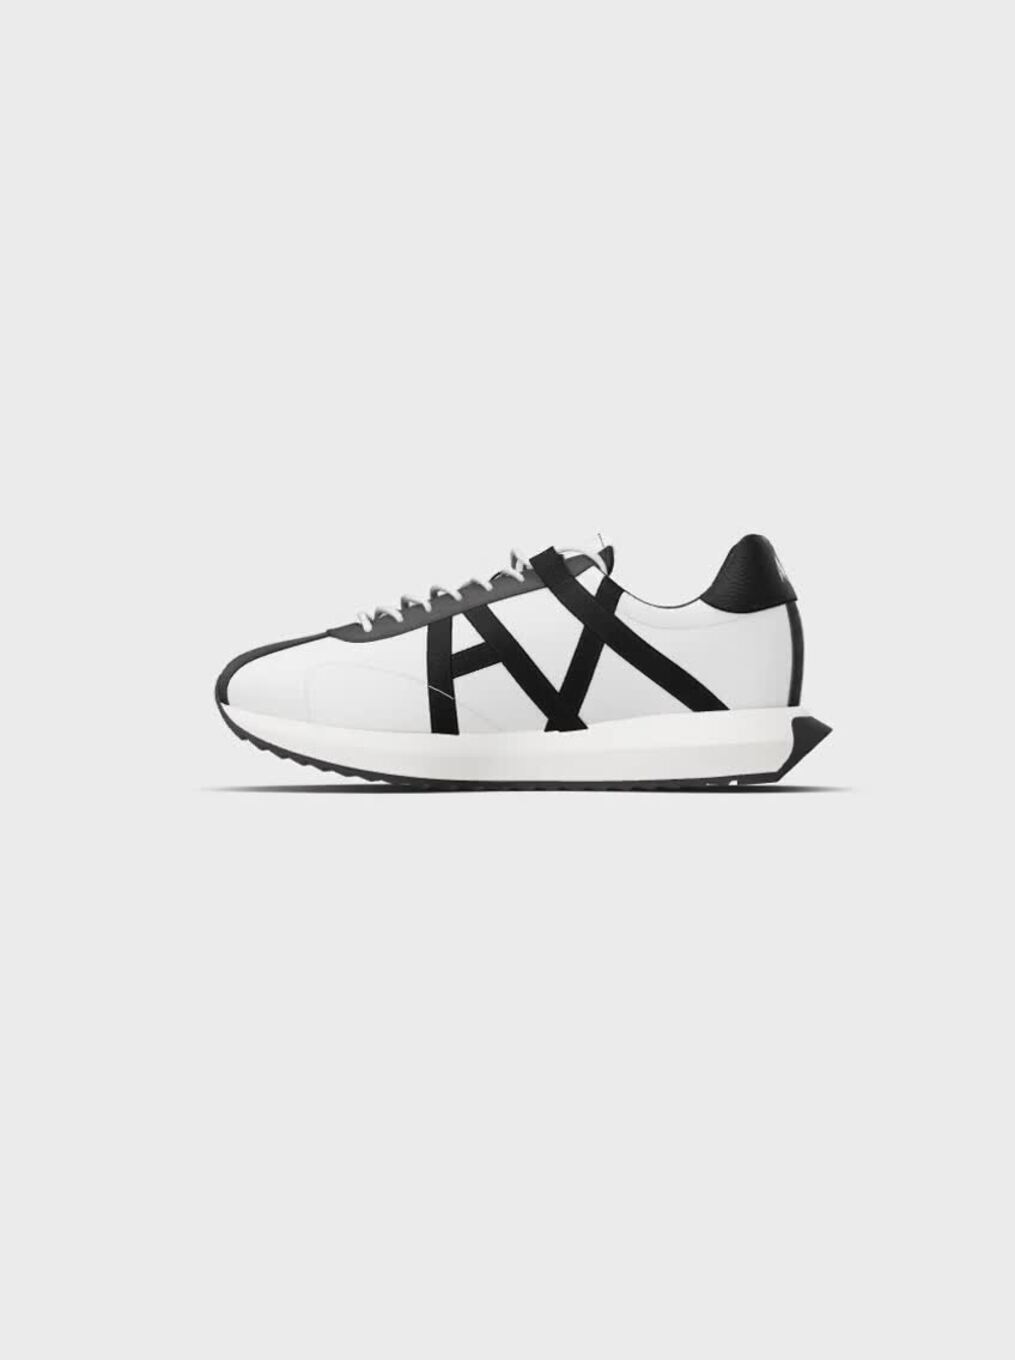 Sneakers in technical fabric, mesh and suede | ARMANI EXCHANGE Man